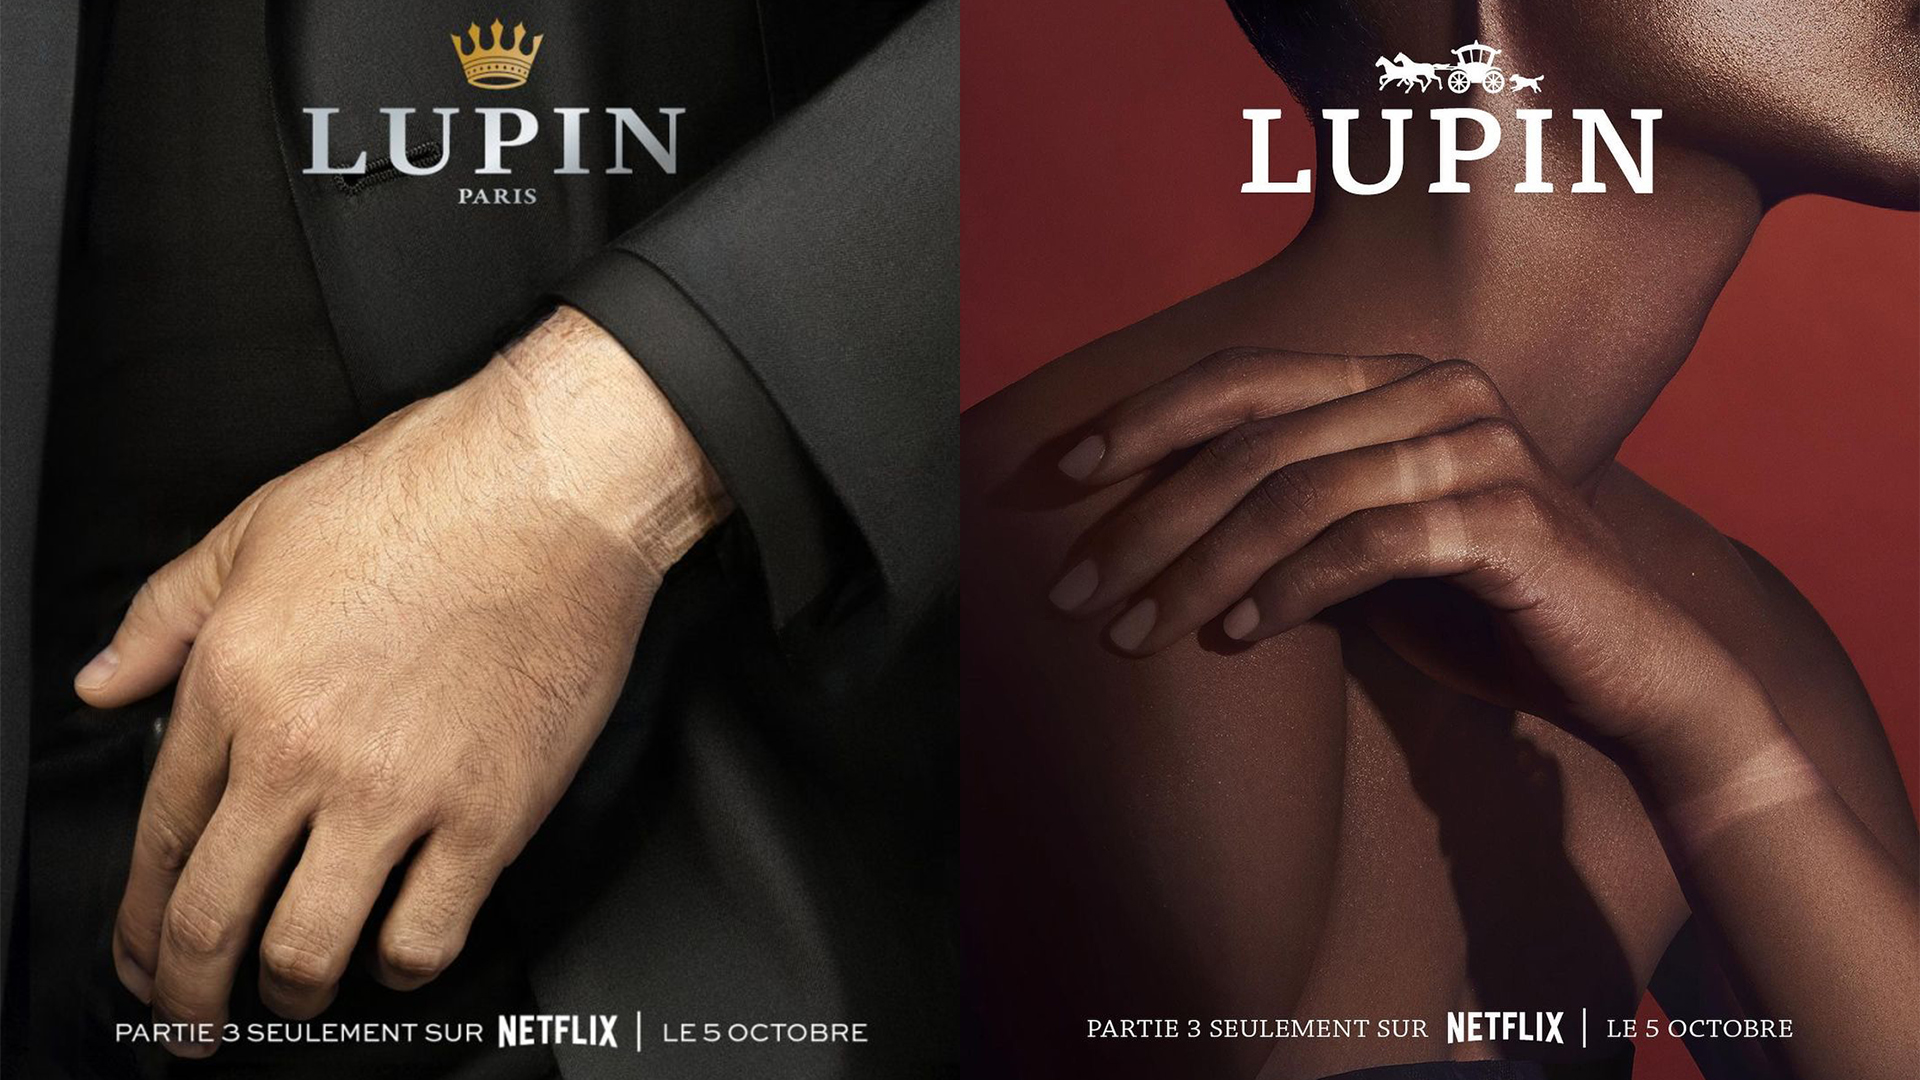 Netflix 'steals' from luxury brands in clever ad campaign